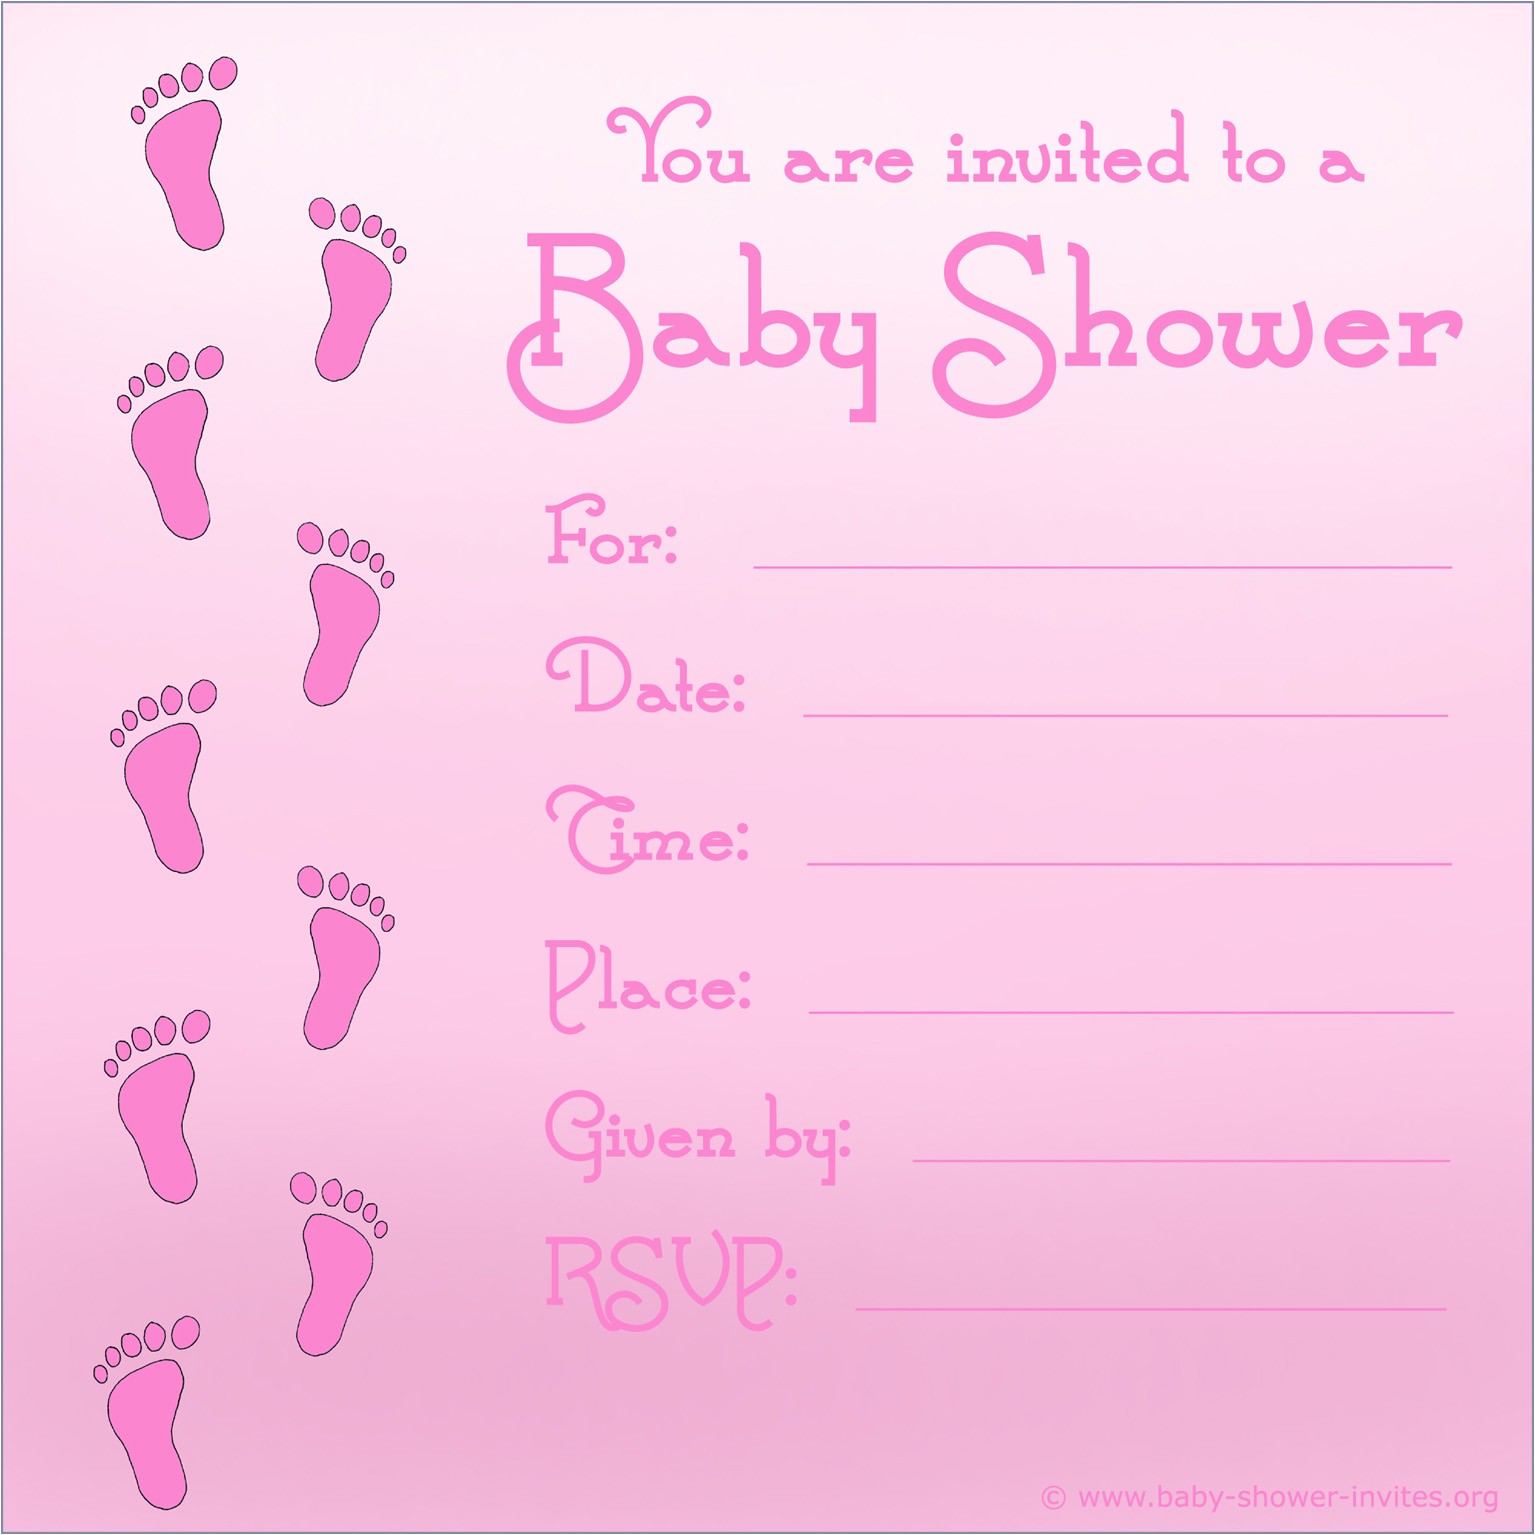 Make My Own Baby Shower Invitations Online for Free Free Printable Baby Shower Invitations for Girls